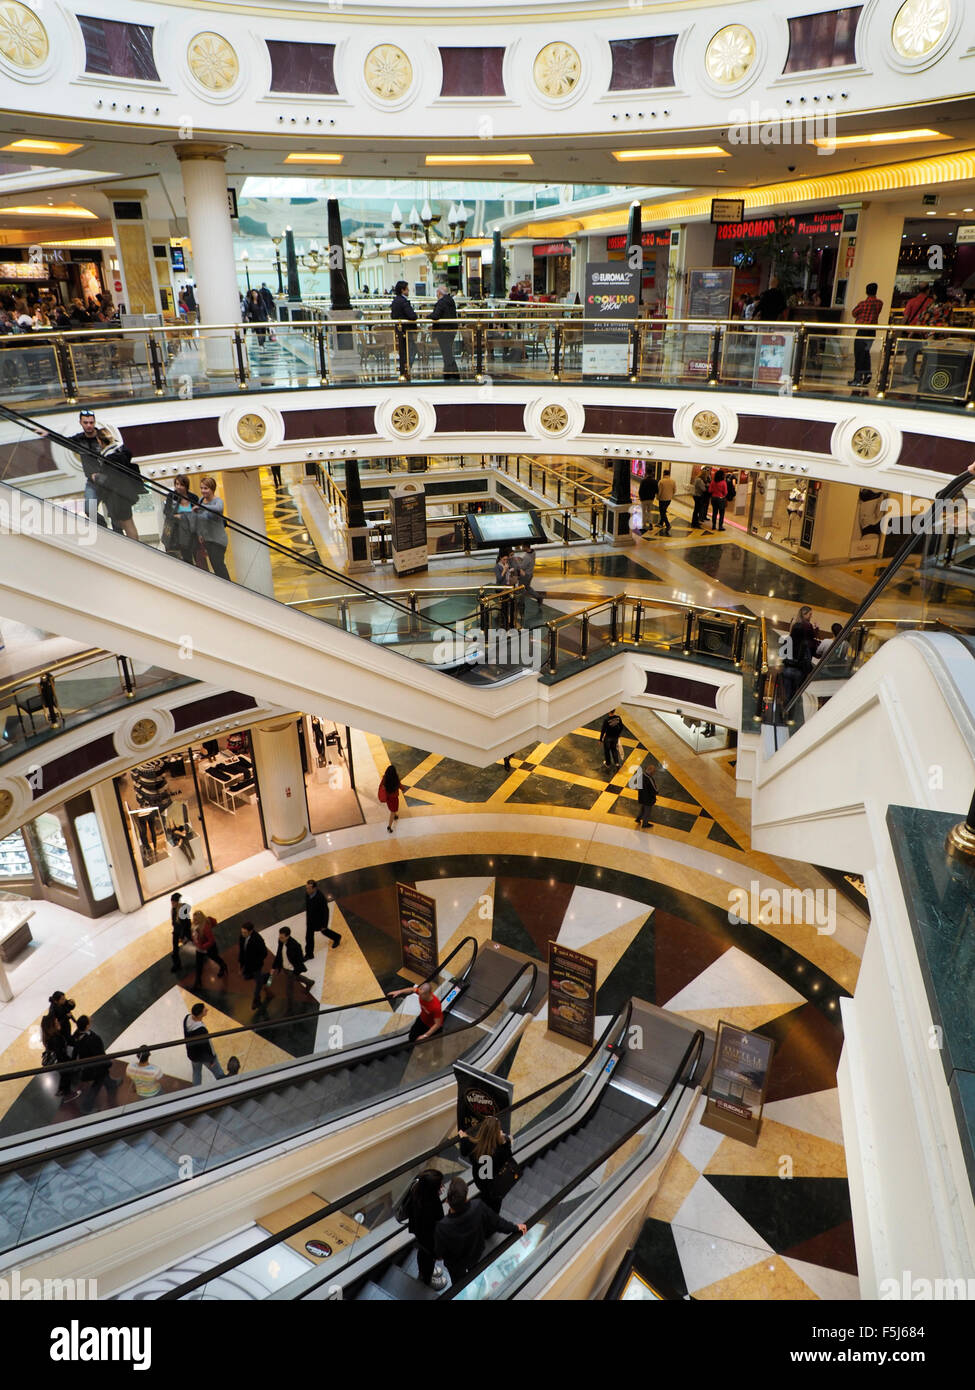 Page 2 - Mall Interior High Resolution Stock Photography and Images - Alamy